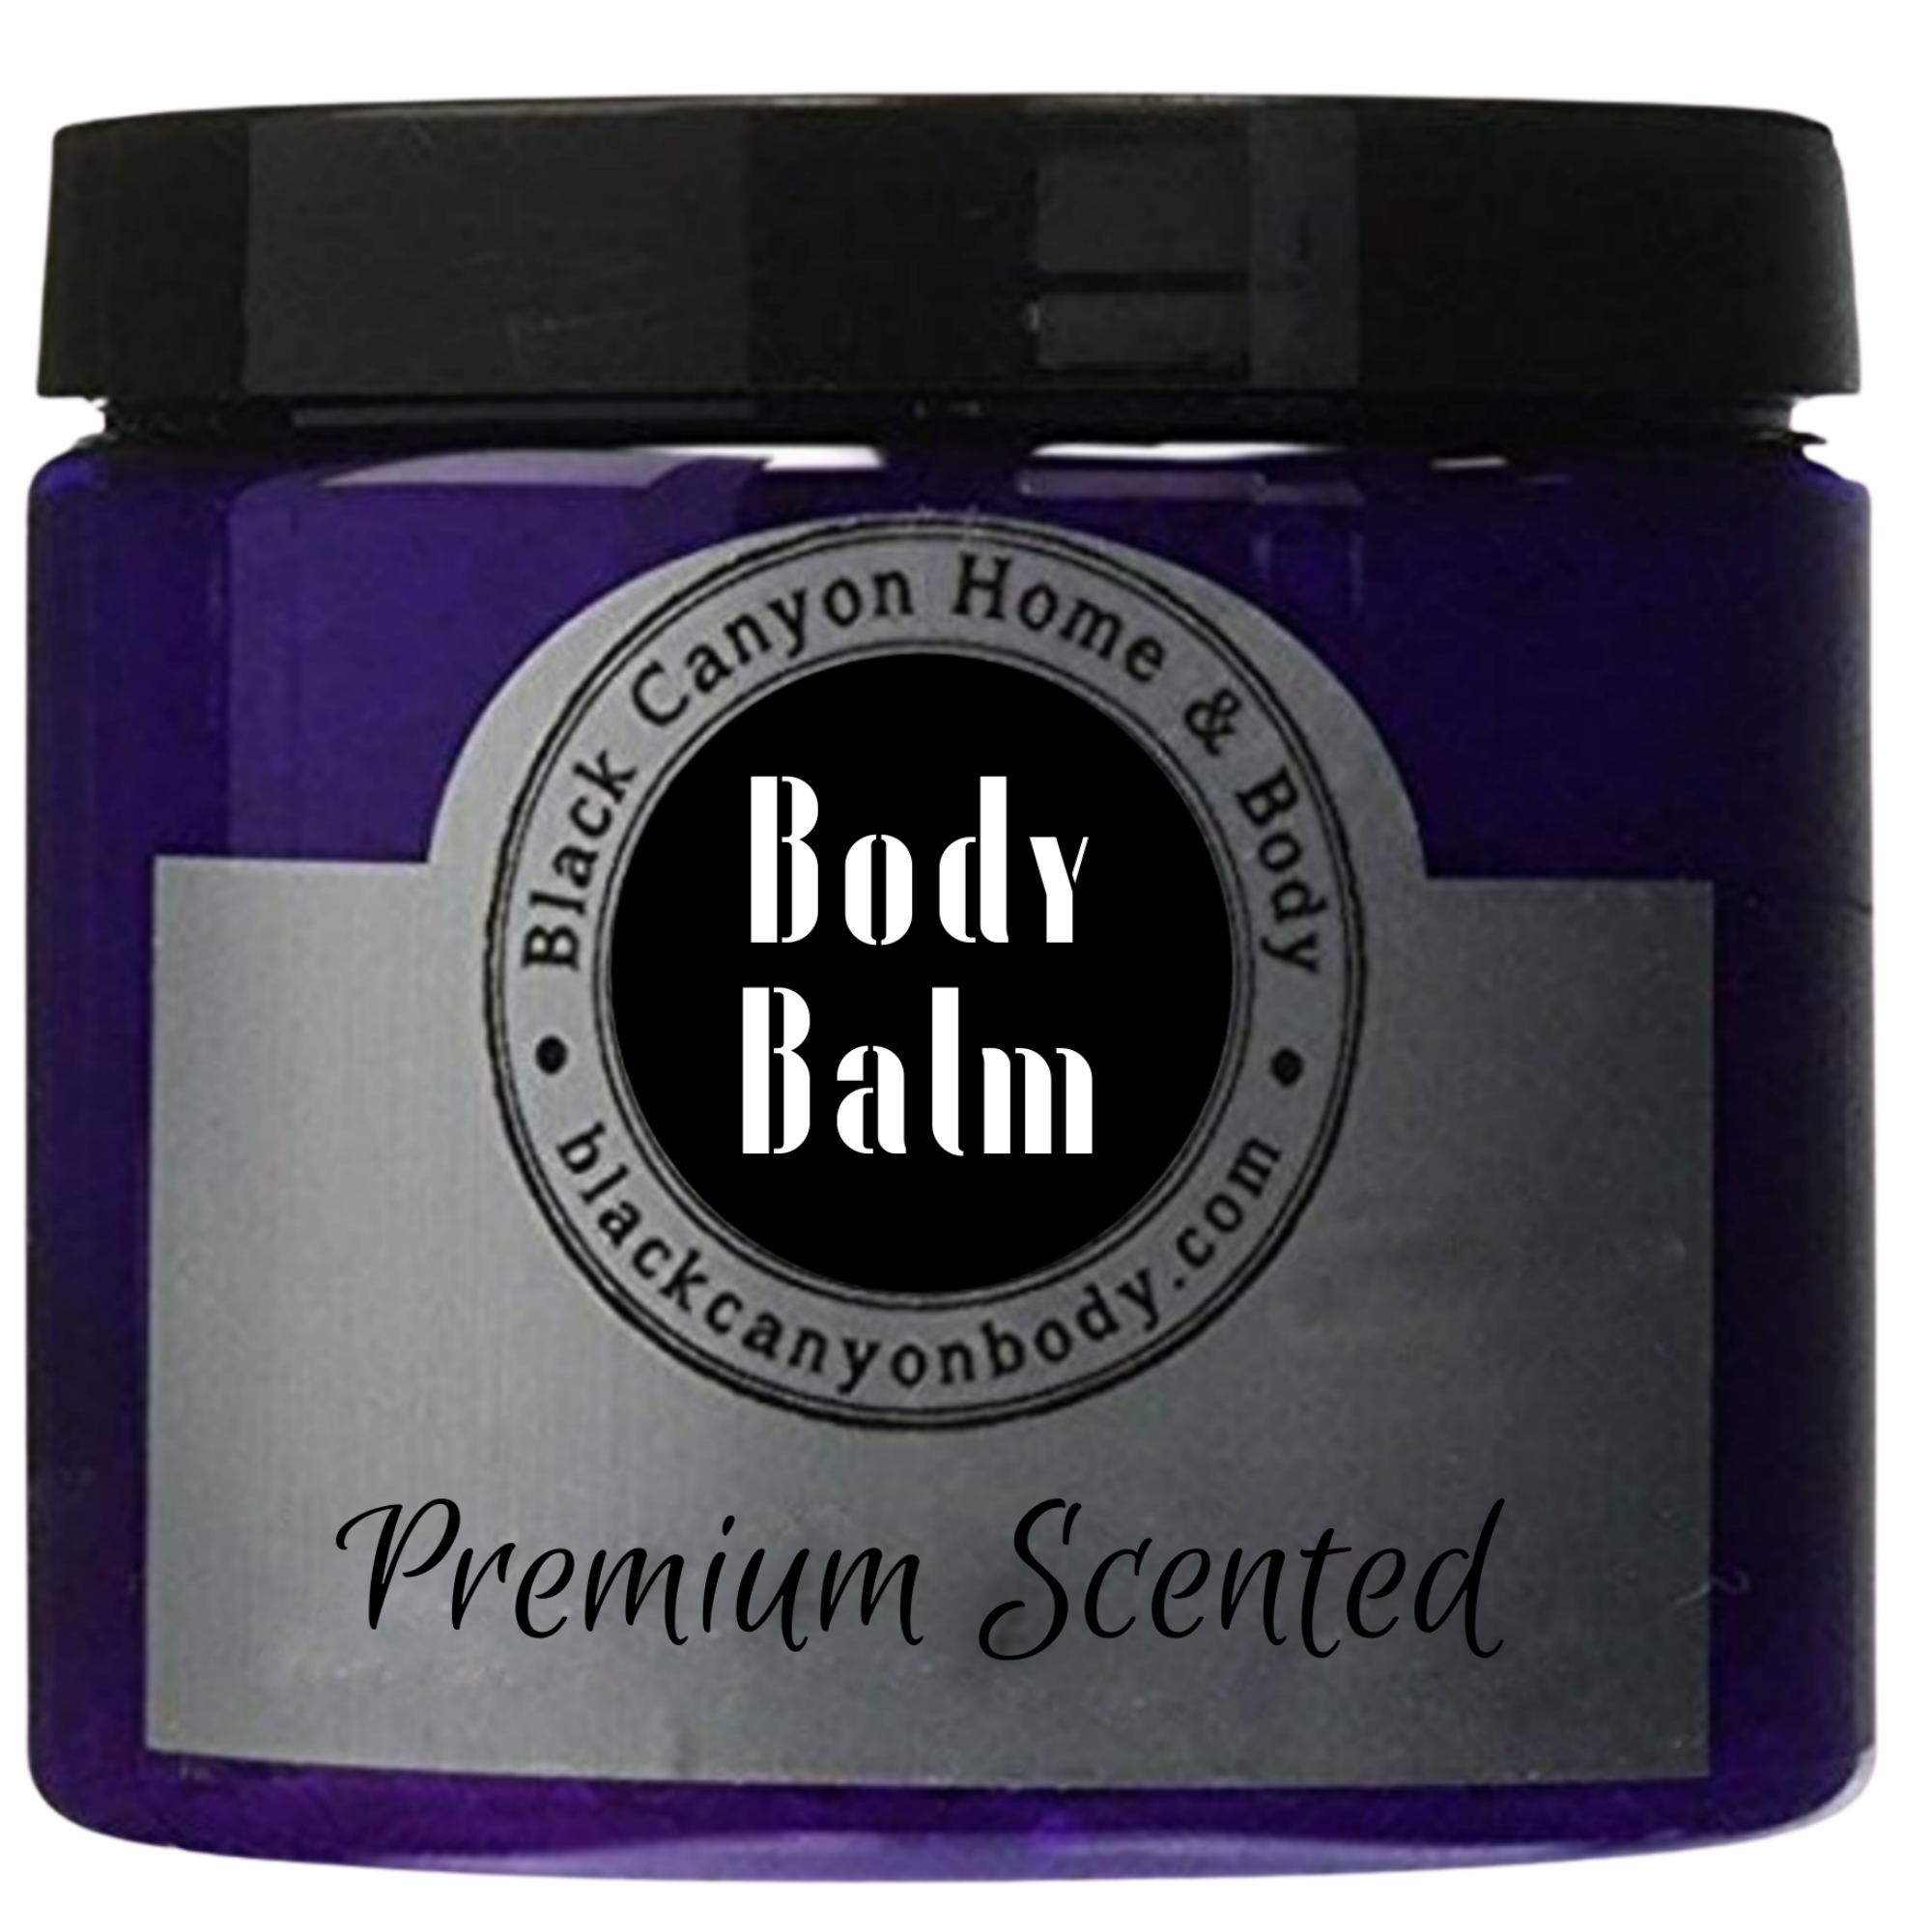 Black Canyon Hookah Scented Natural Body Balm with Shea